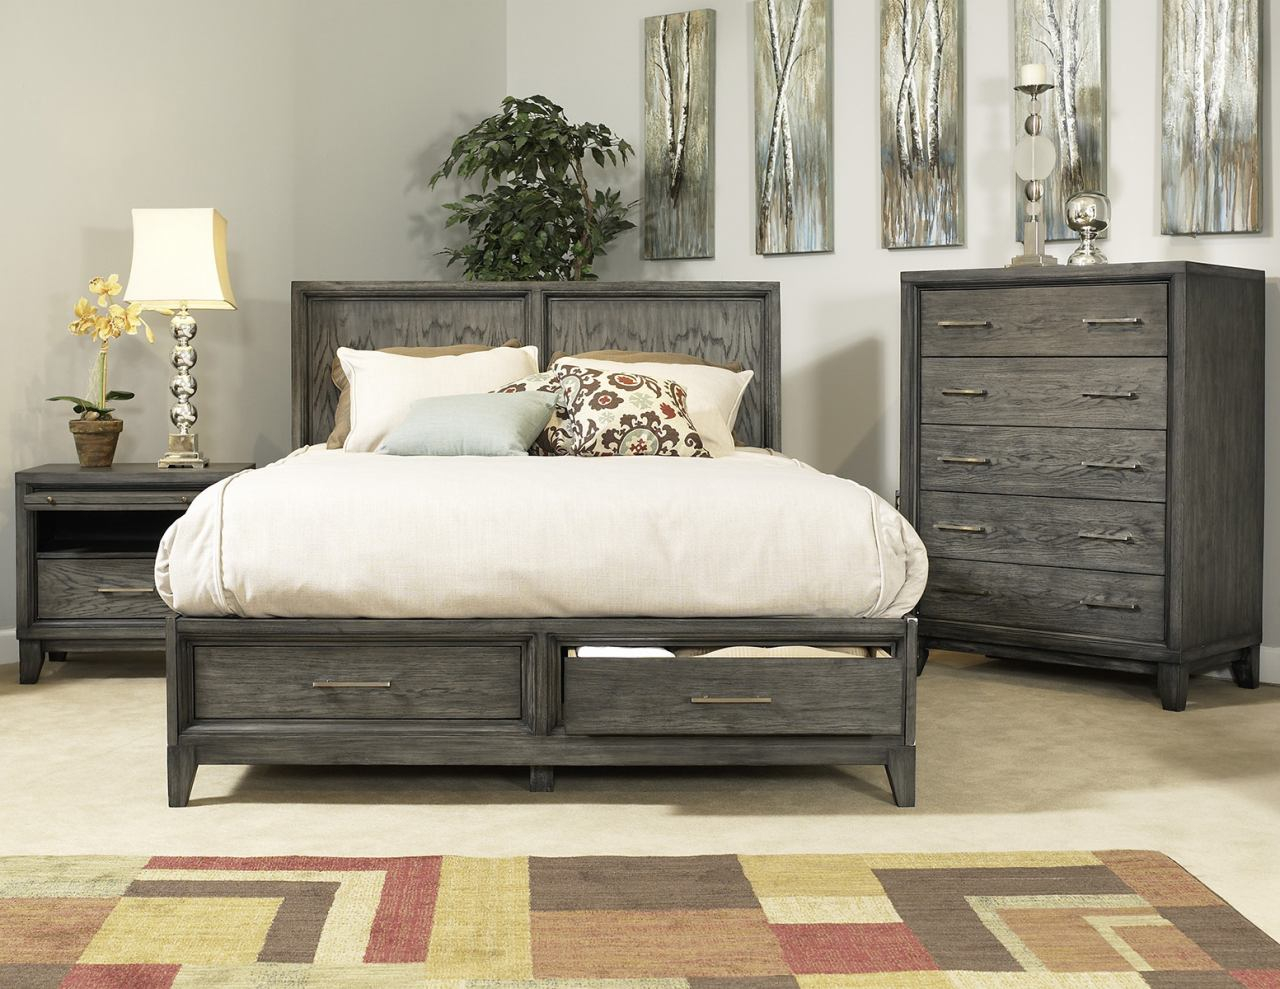 Ligna Soho 4 Piece Panel Storage Bedroom Set In Gray Wash within proportions 1280 X 989